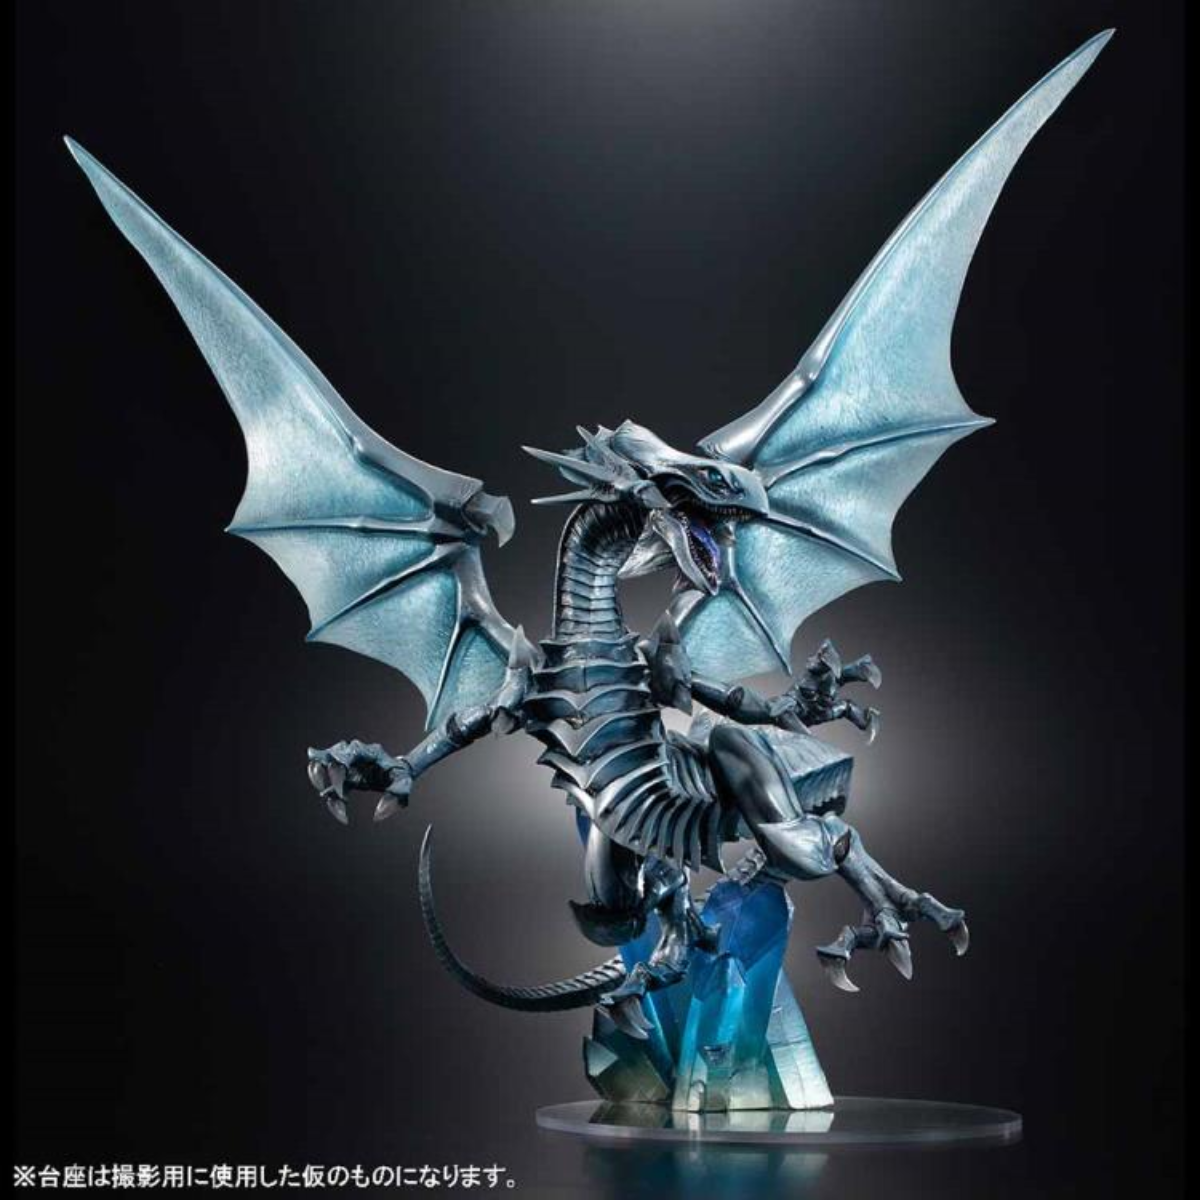 Yu-Gi-Oh! Duel Monsters Art Works Monsters Figurine Blue Eyes White Dragon Holographic Edition-MegaHouse-Ace Cards & Collectibles